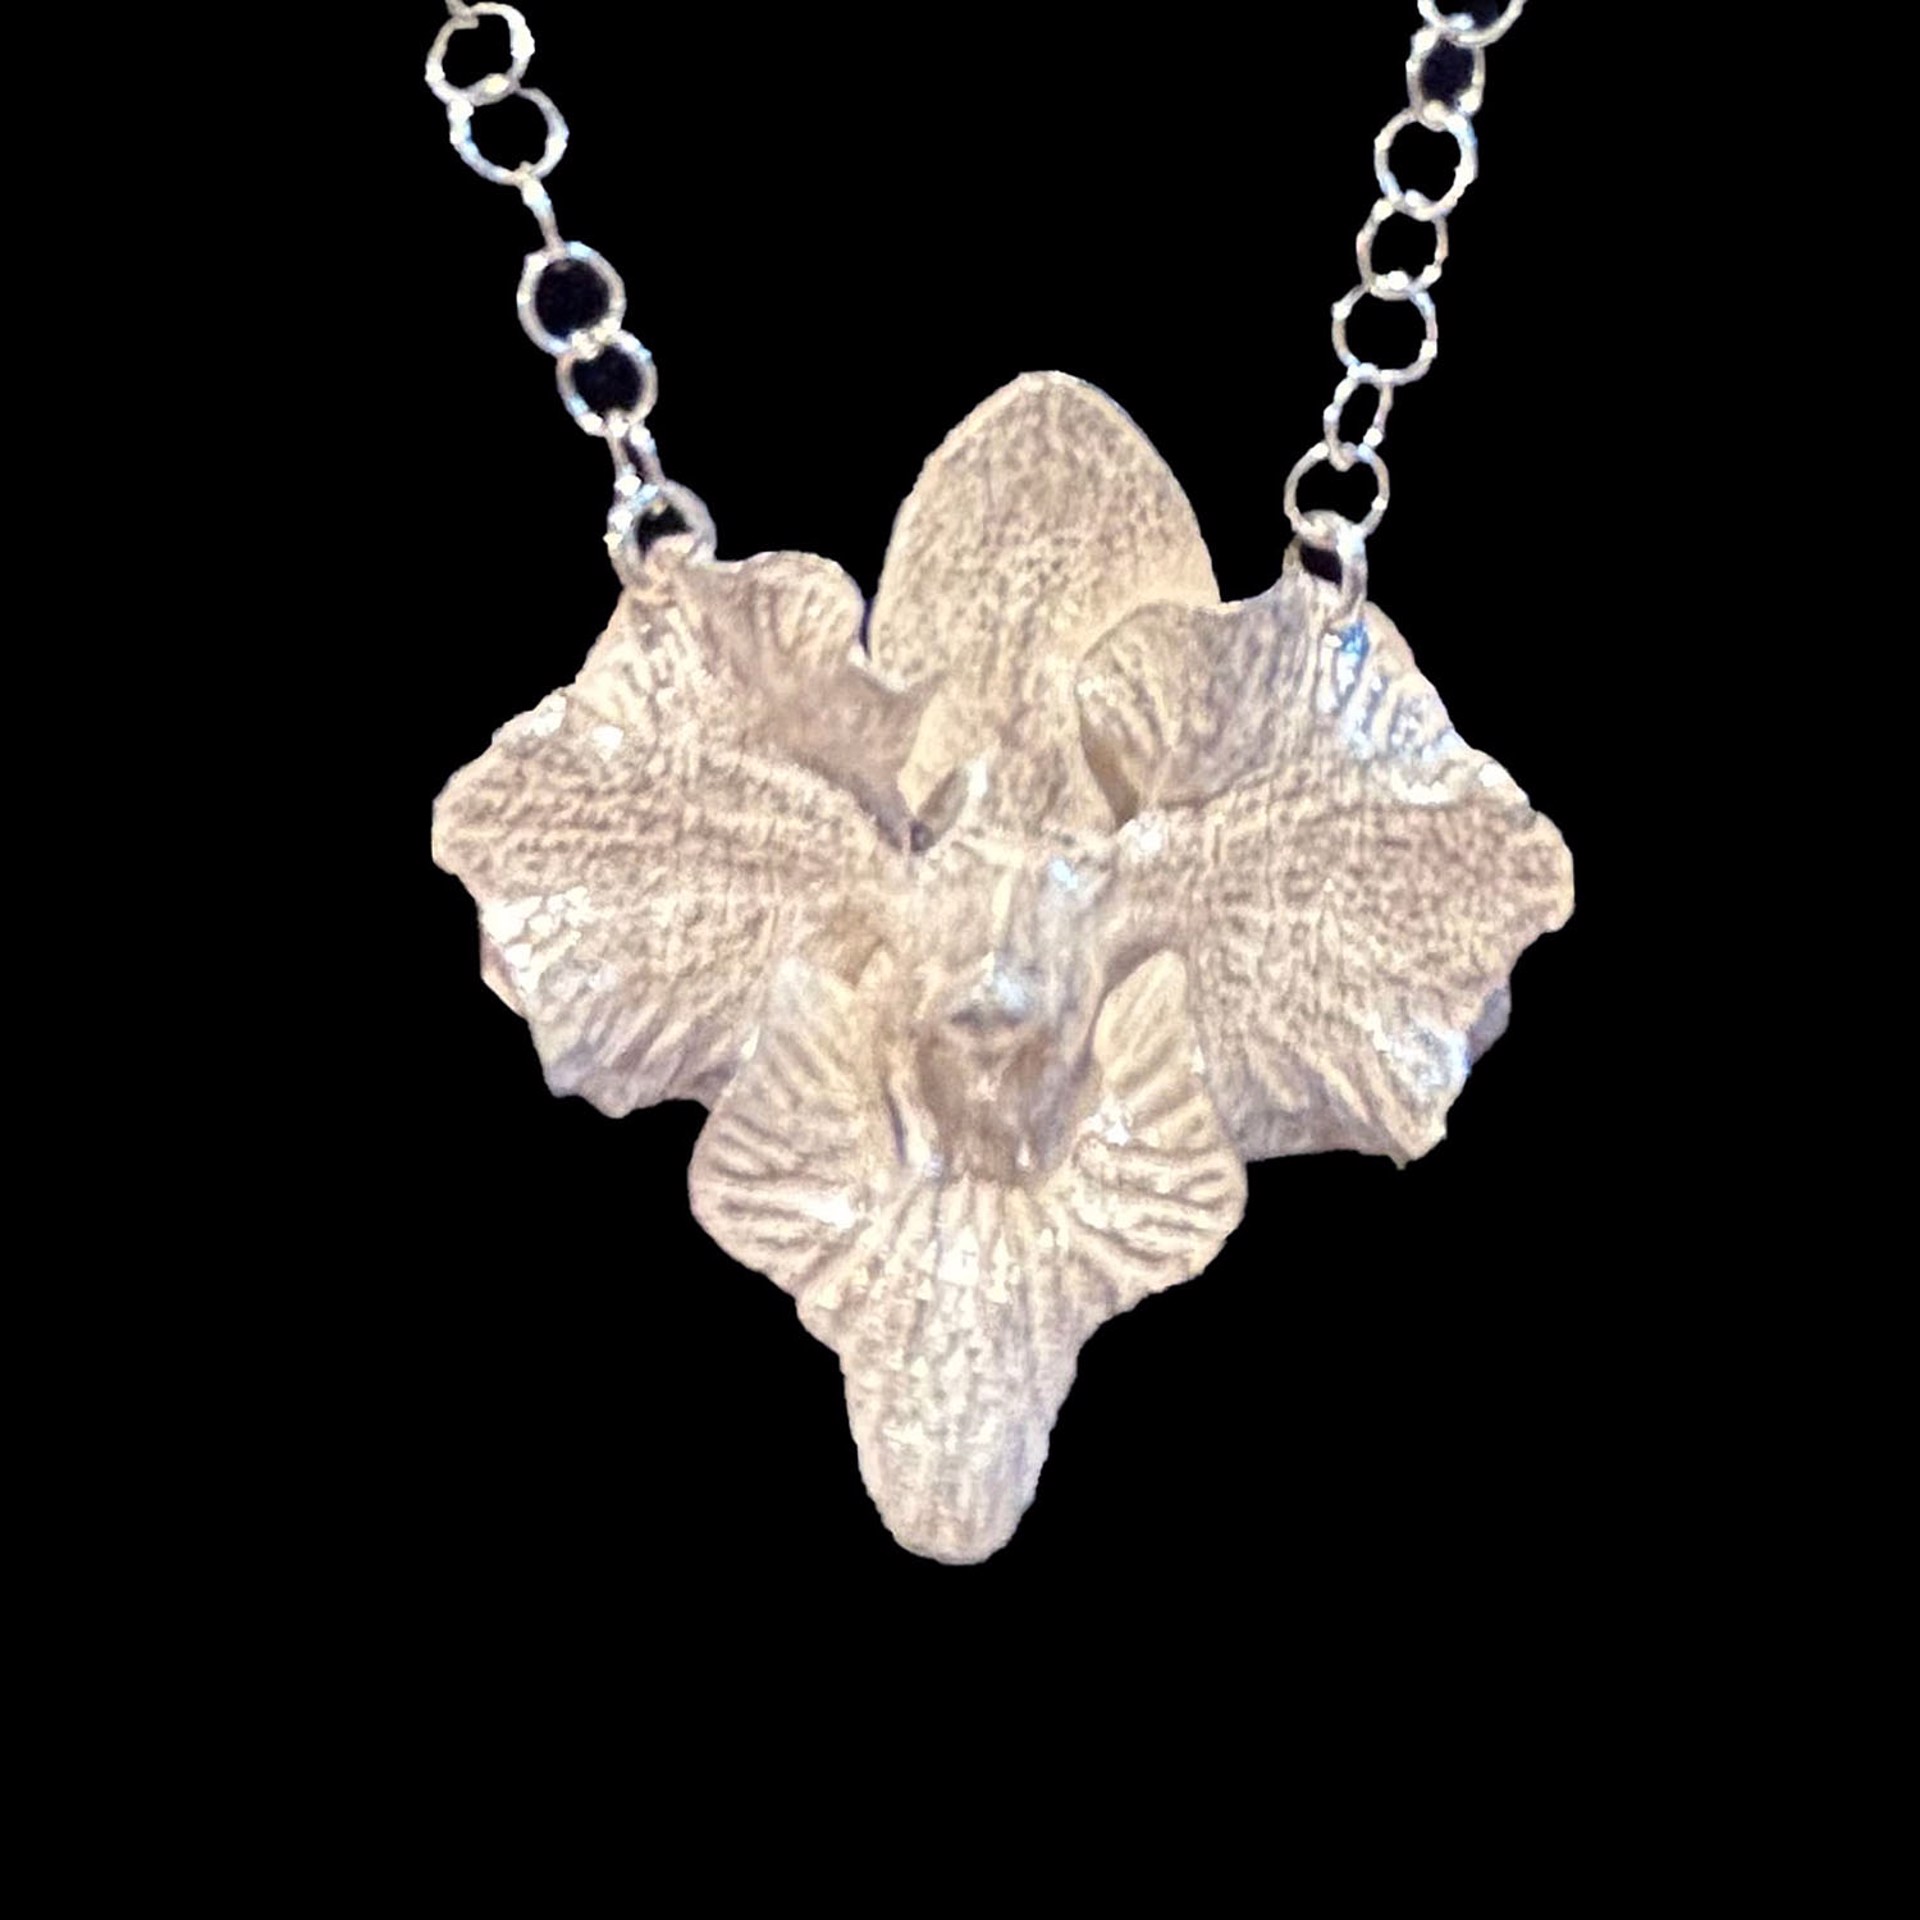 XLG Single Orchid Necklace by Wayne Keeth